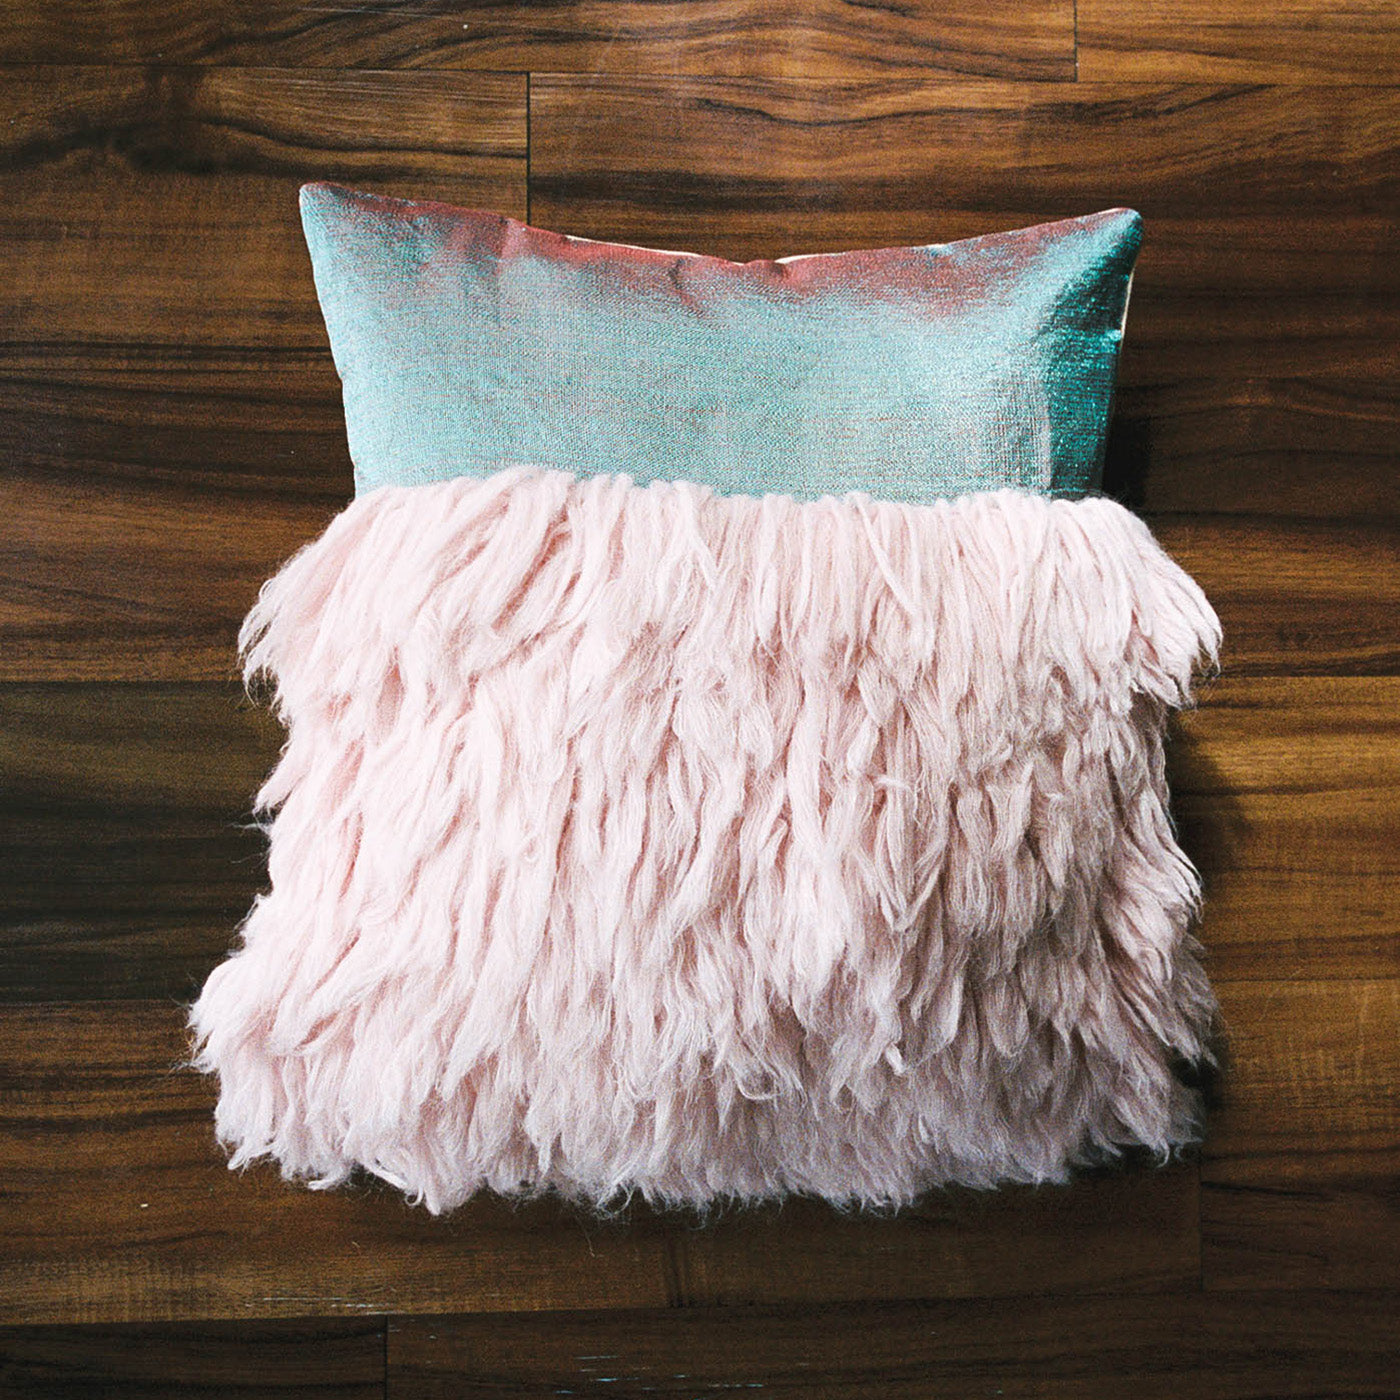 Hand Knit Textured Throw Pillow in Cotton Candy